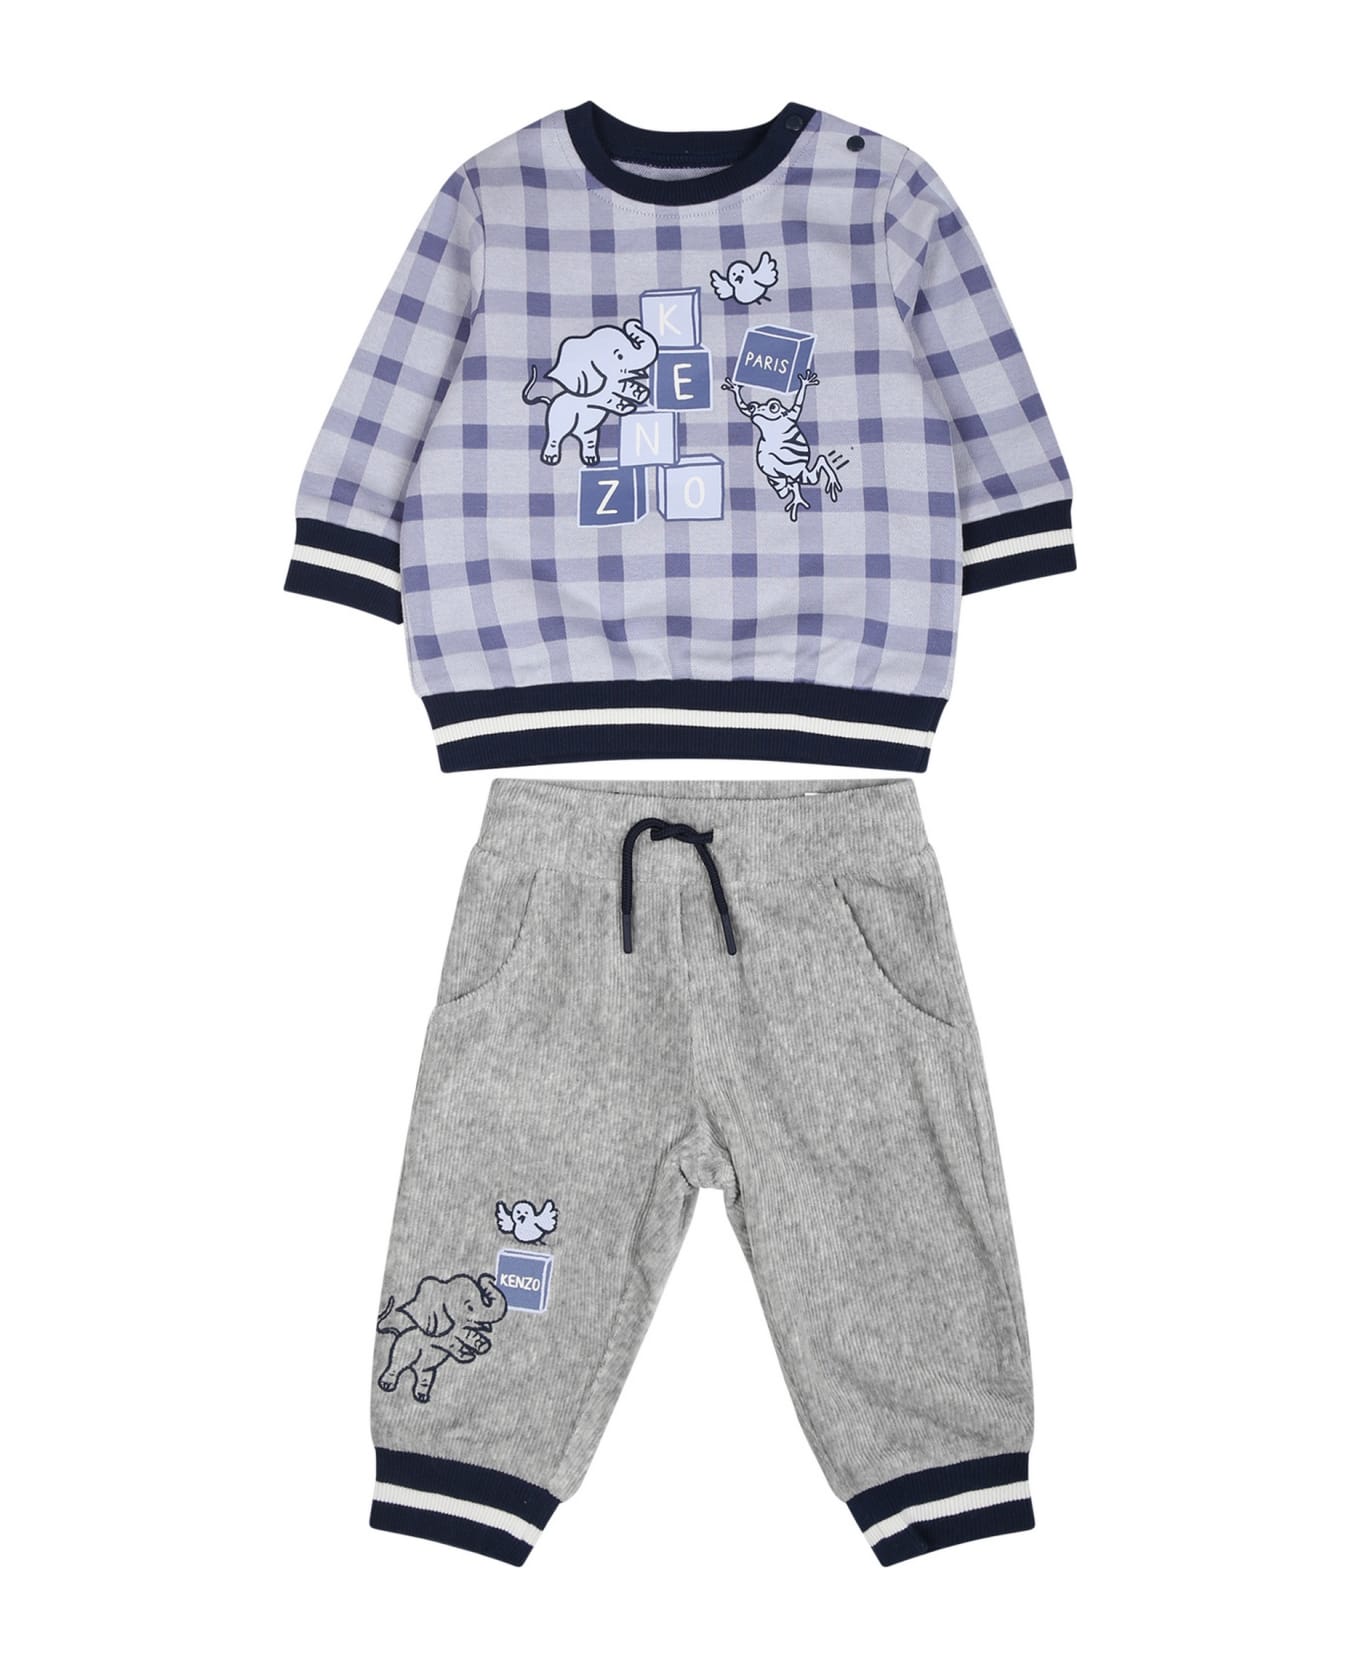 Kenzo Kids Light Blue Suit For Baby Boy With Elephant - Light Blue